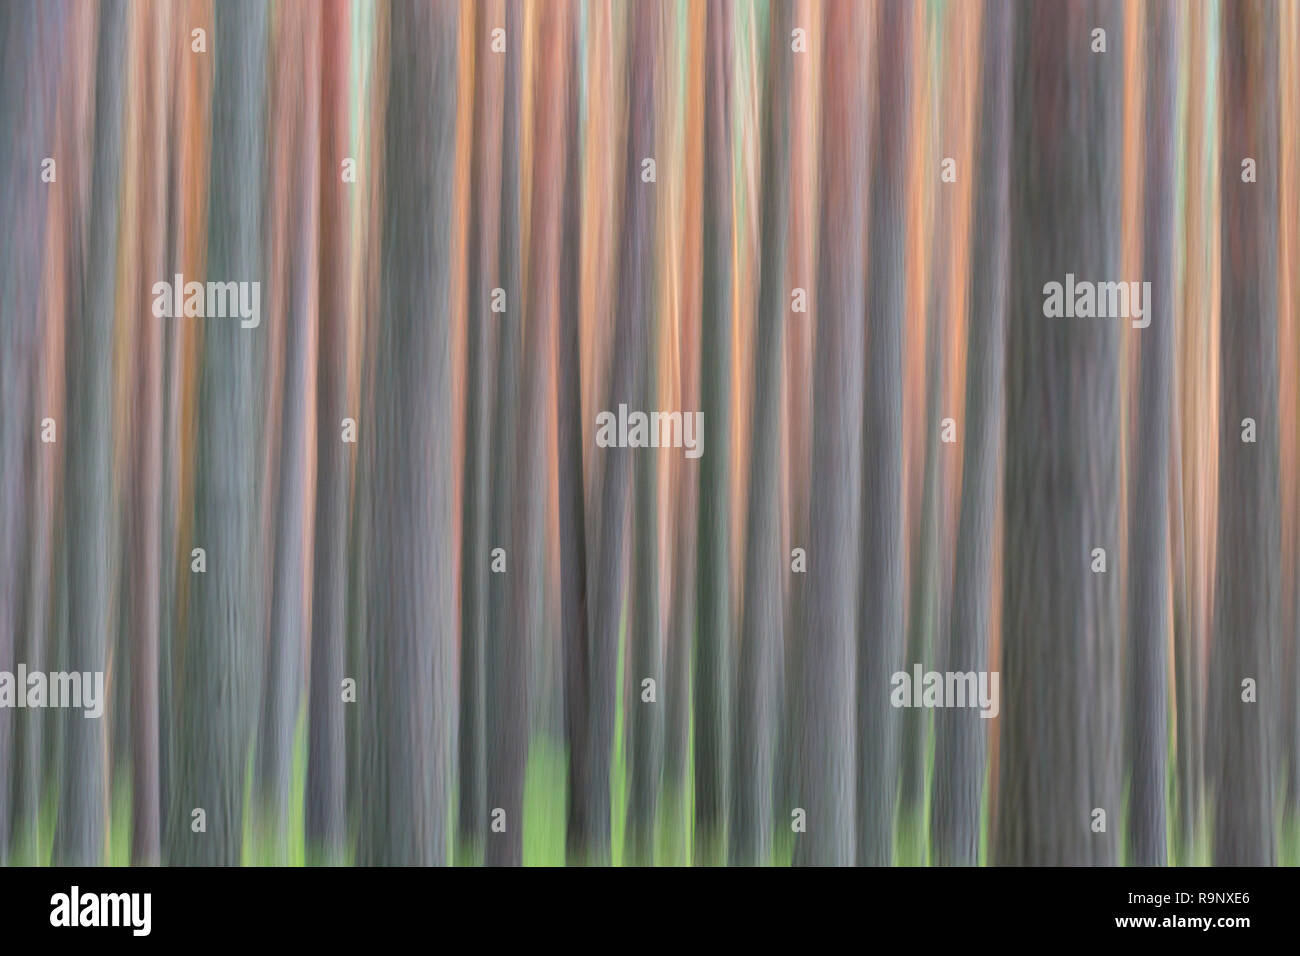 Abstract image of motion blurred Scots Pine (Pinus sylvestris) tree trunks in coniferous forest Stock Photo